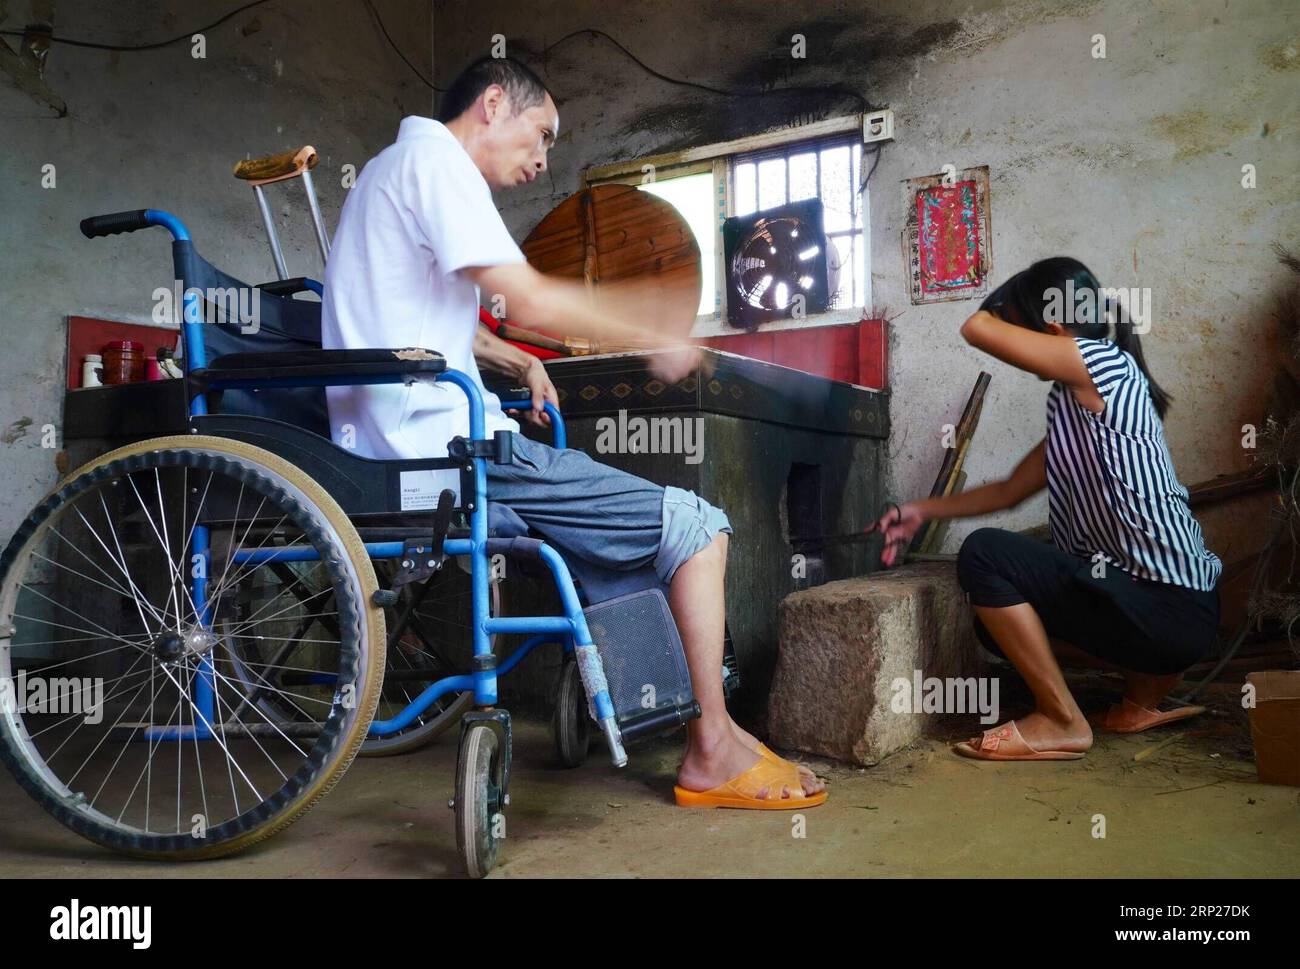 (180823) -- NANCHANG, Aug. 23, 2018 -- Zhang Chunmei cooks with her husband at their home in Wan an County, east China s Jiangxi Province, Aug. 21, 2018. Zhang Chunmei has been providing for her family after her husband, Xu Liliang, was diagnosed with Parkinson s disease in 2009. Thanks to her hardworking and the help from others, her family s living standard has improved. Her family decided to take a wedding dress photo to mark their 15 years wedding anniversary. ) (zyd) CHINA-JIANGXI-WEDDING ANNIVERSARY-POVERTY (CN) HuxChenhuan PUBLICATIONxNOTxINxCHN Stock Photo